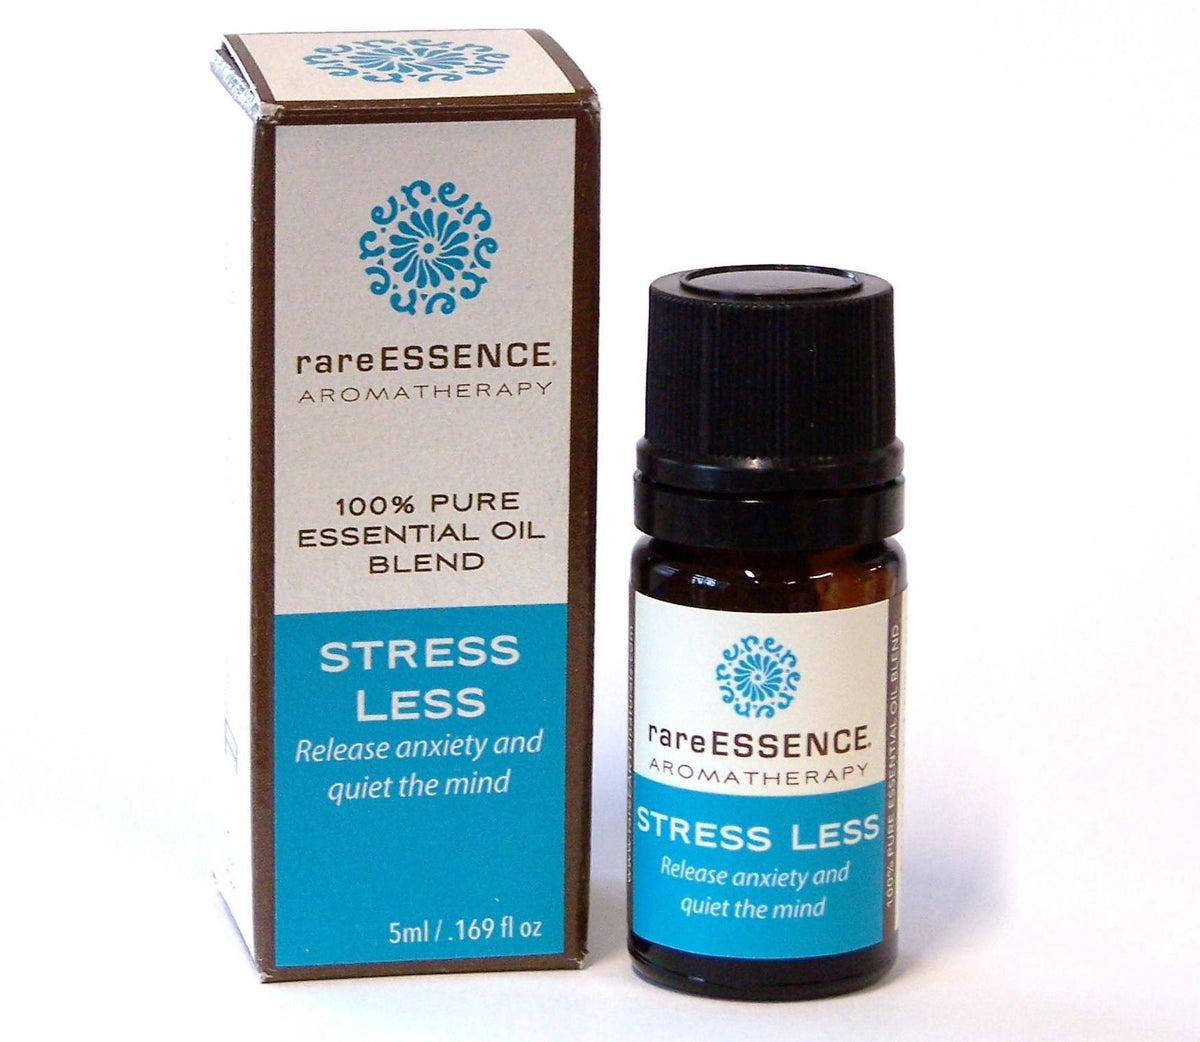 Stress Less essential oil blend. Release anxiety and quiet the mind.